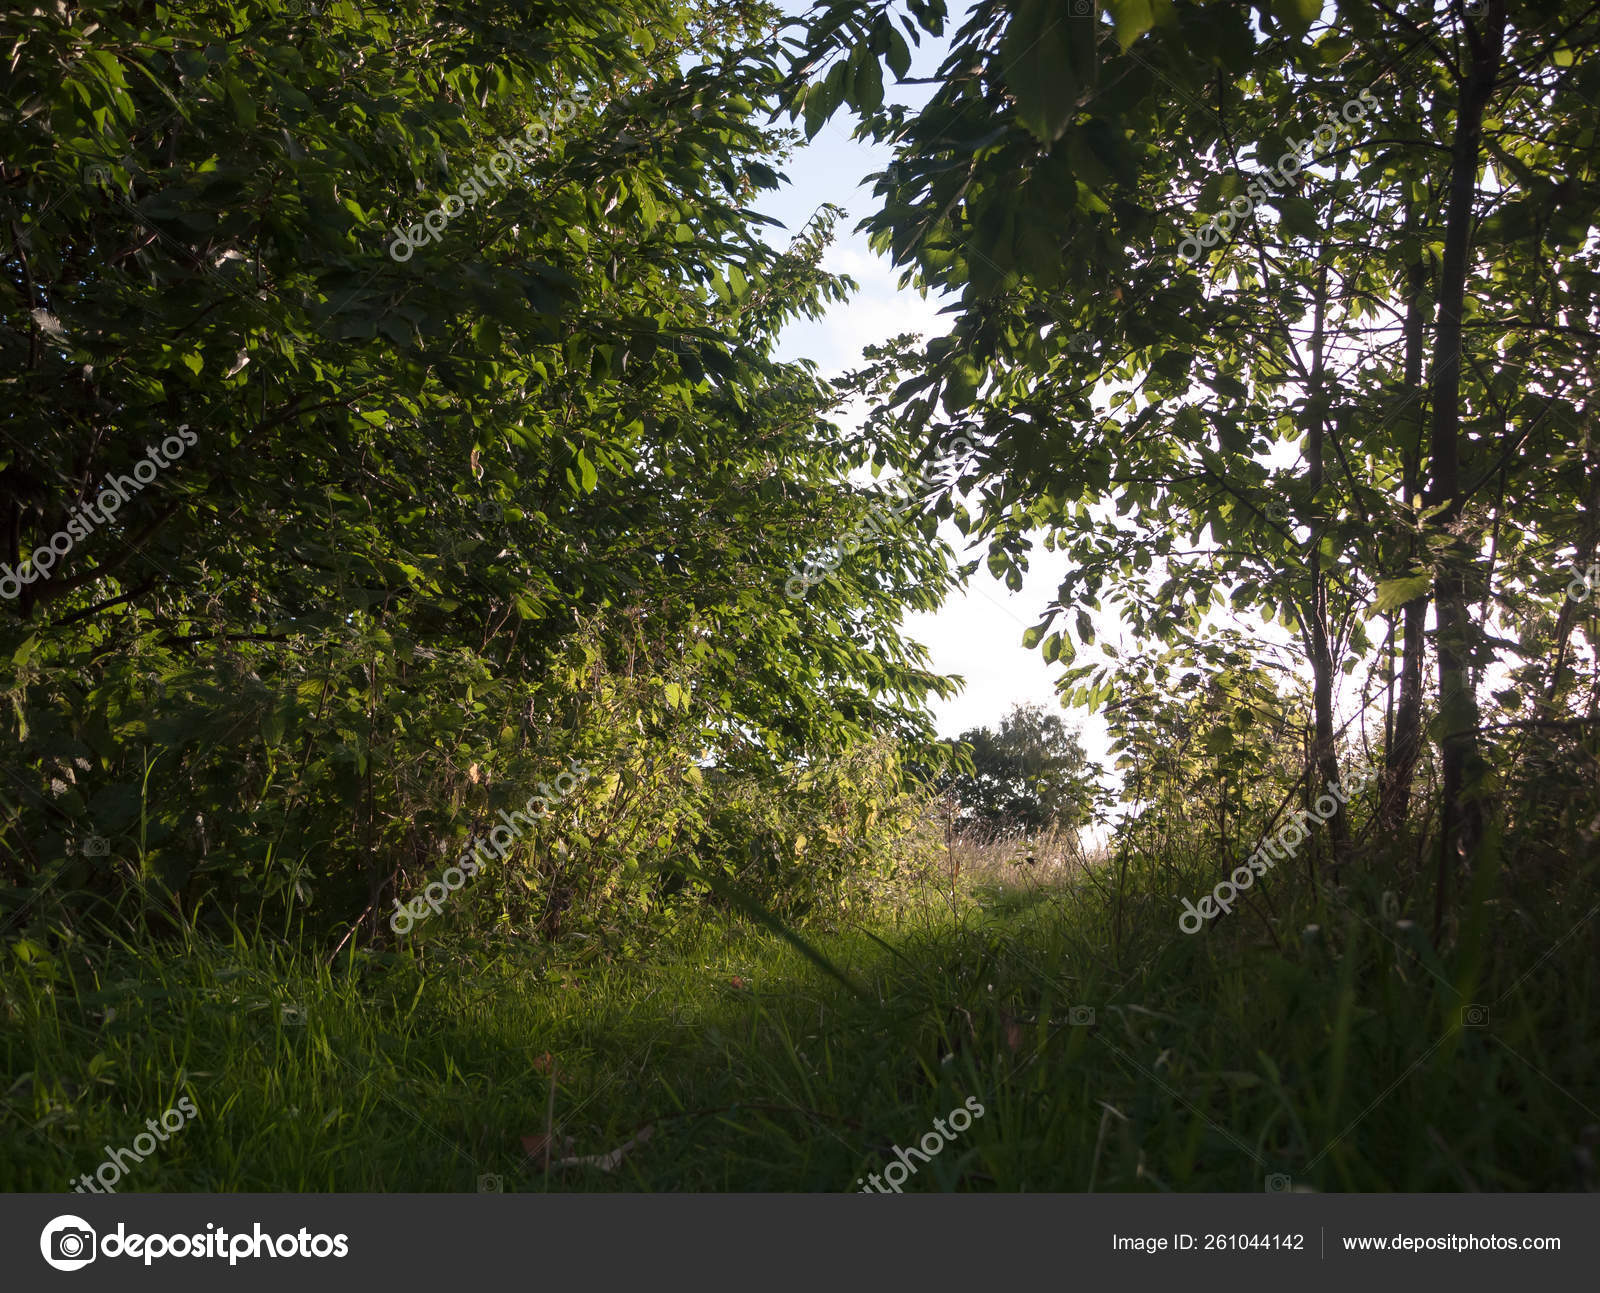 Lush Walkway Summer Forest Scene Peaceful Stock Photo C Yayimages